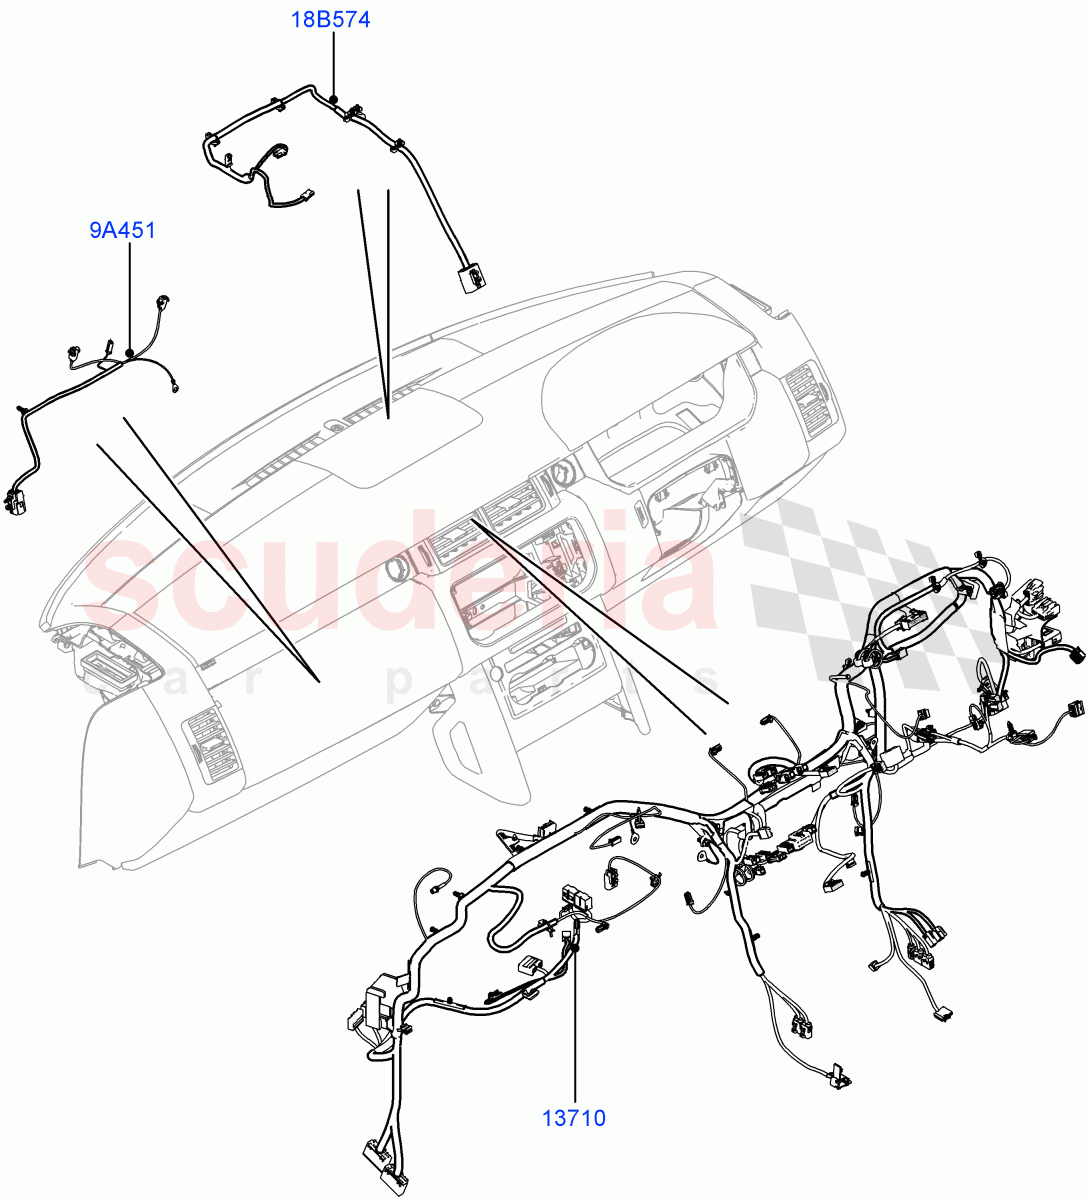 Electrical Wiring - Engine And Dash(Facia)(3.0 V6 Diesel Electric Hybrid Eng)((V)FROMFA000001,(V)TOFA999999) of Land Rover Land Rover Range Rover (2012-2021) [2.0 Turbo Petrol AJ200P]